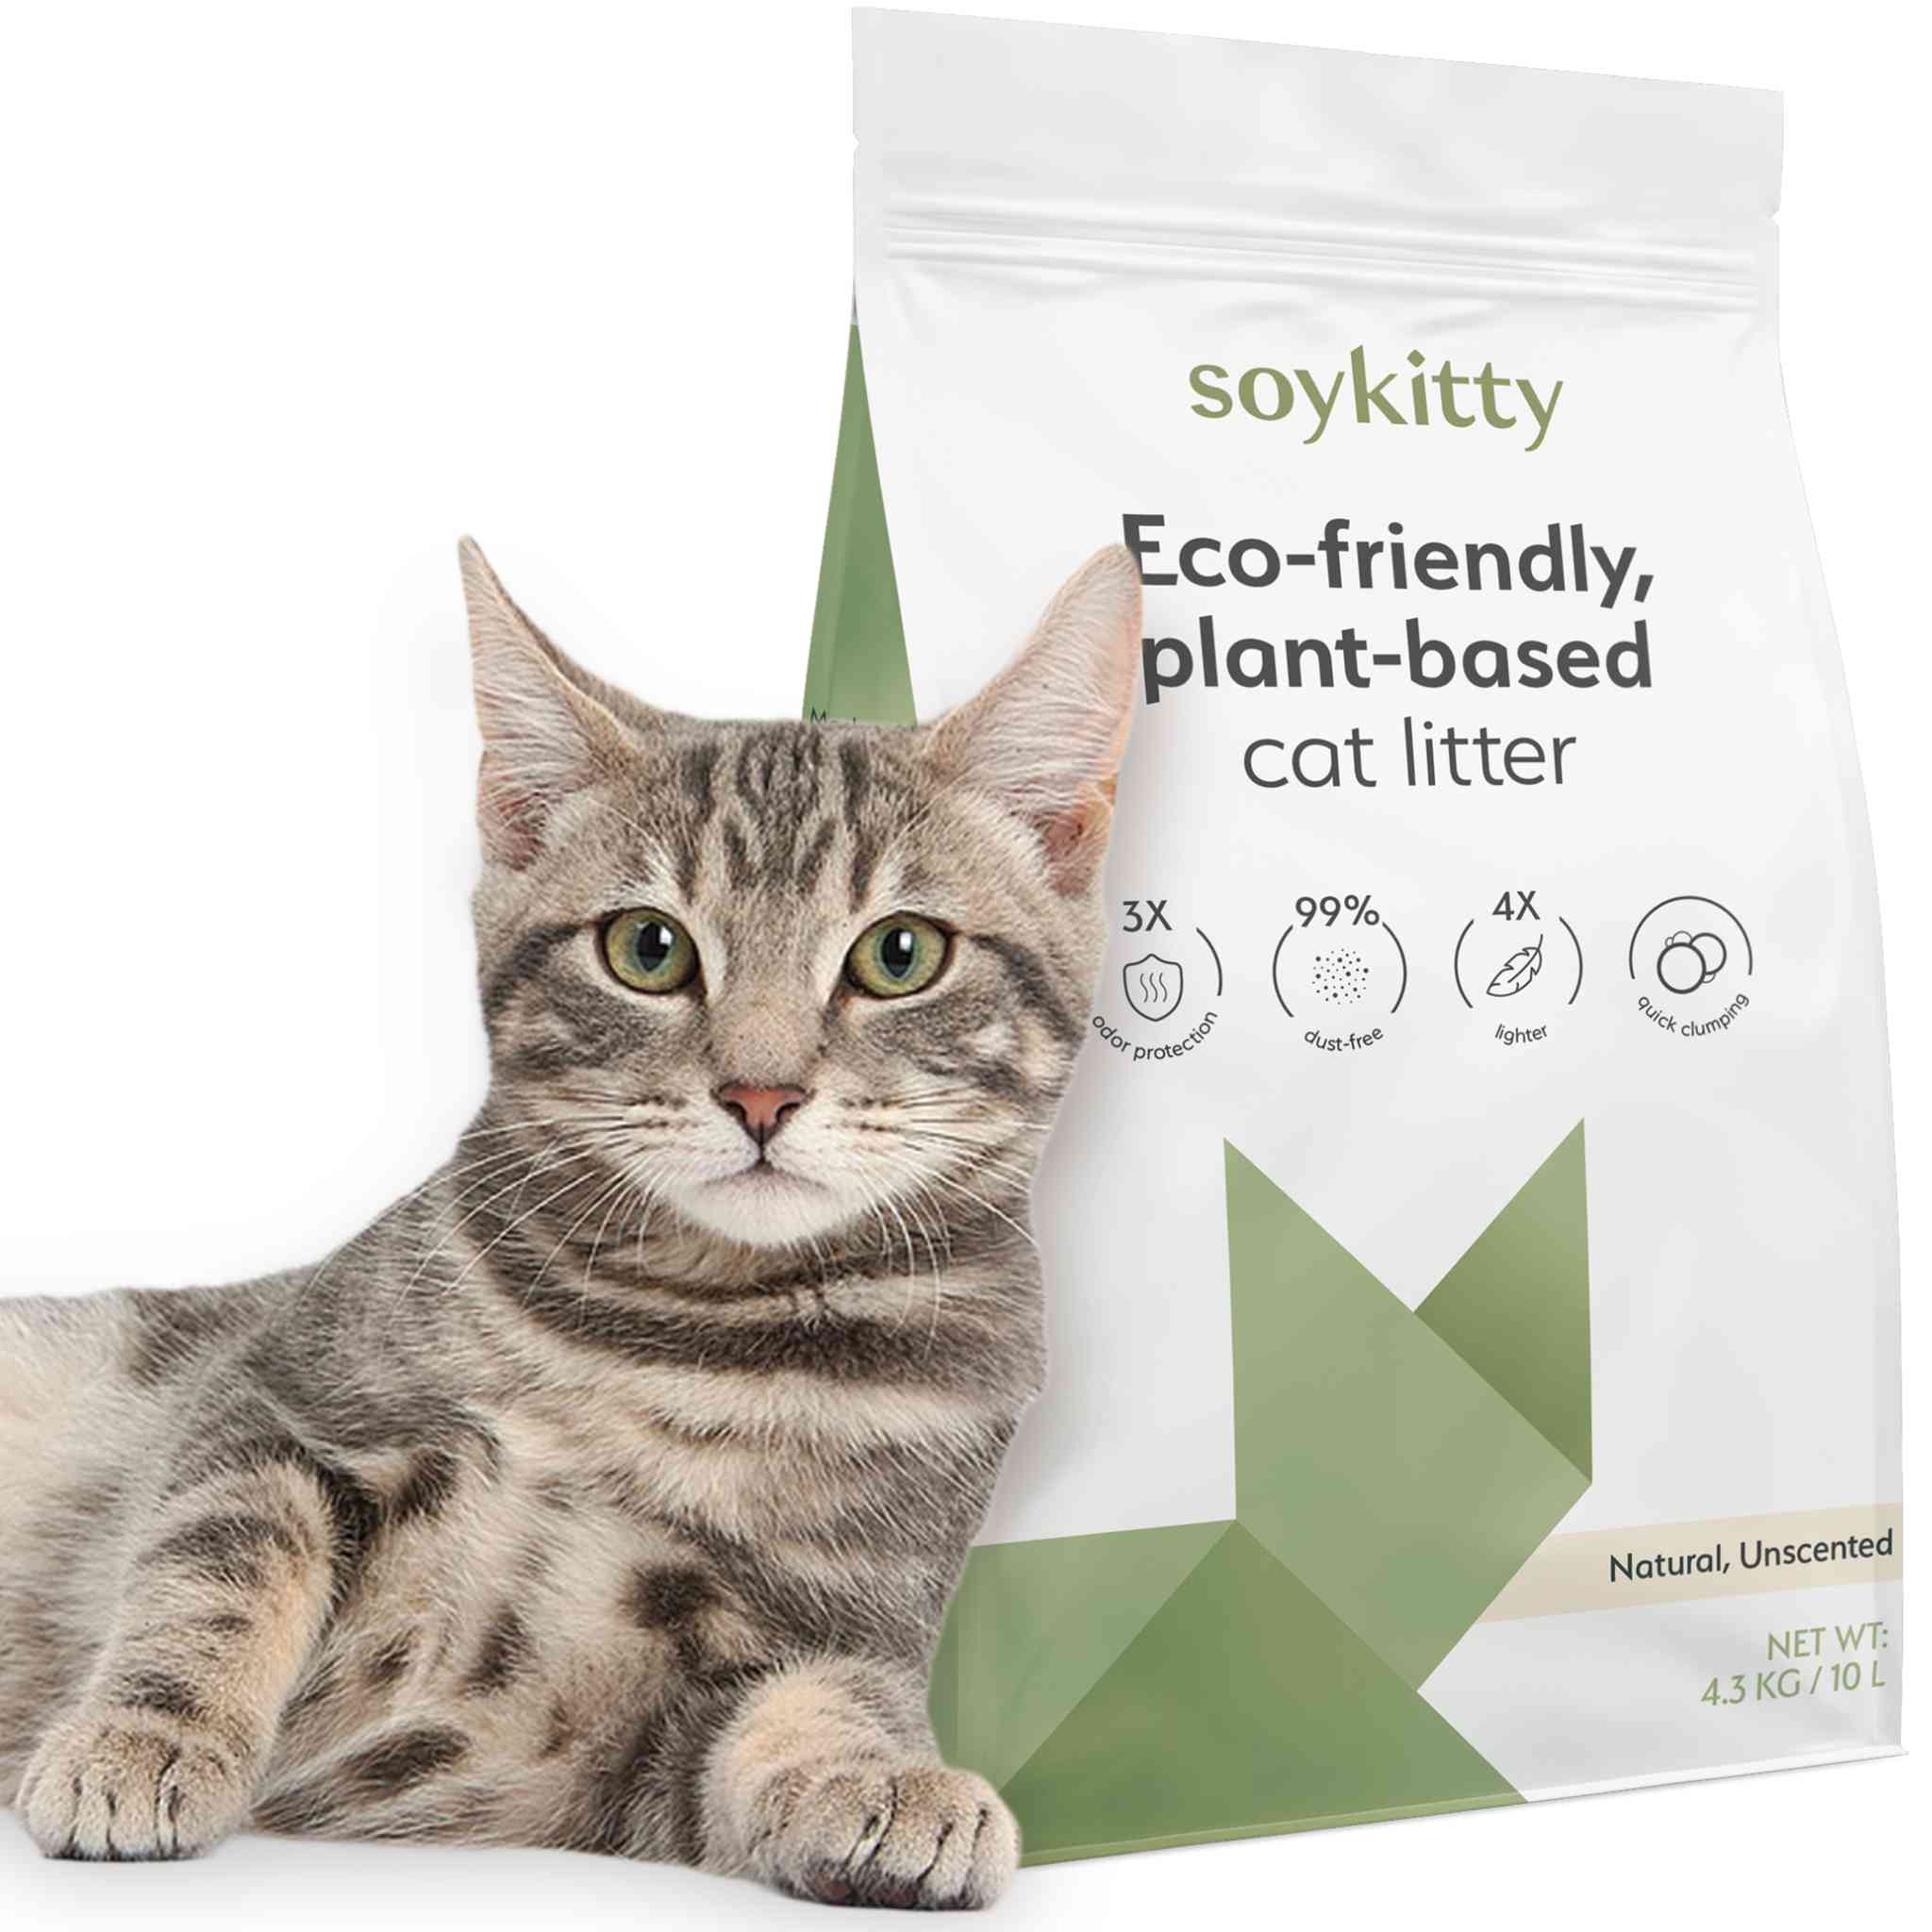 Tabby cat lounging next to a bag of SoyKitty eco-friendly, plant-based cat litter, emphasizing natural, safe, healthy, and biodegradable qualities.